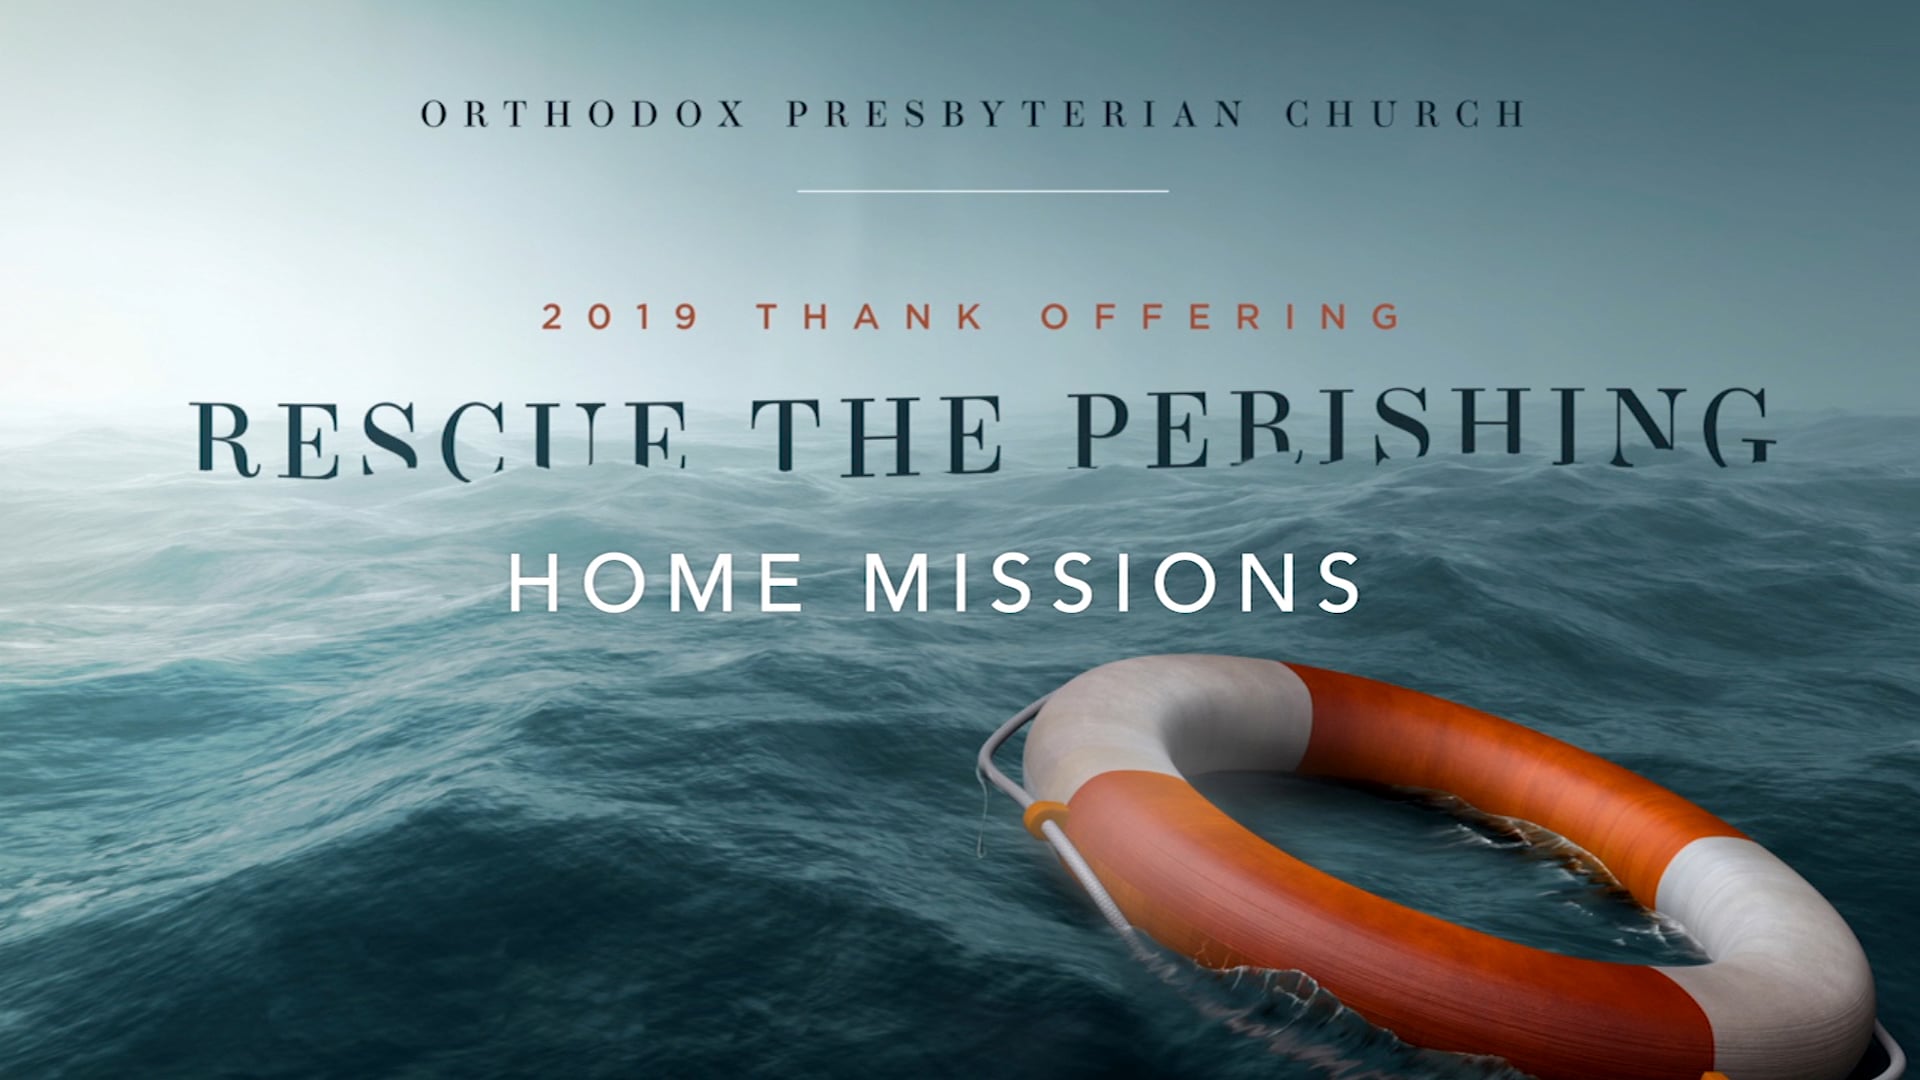 2019 Thank Offering: Home Missions